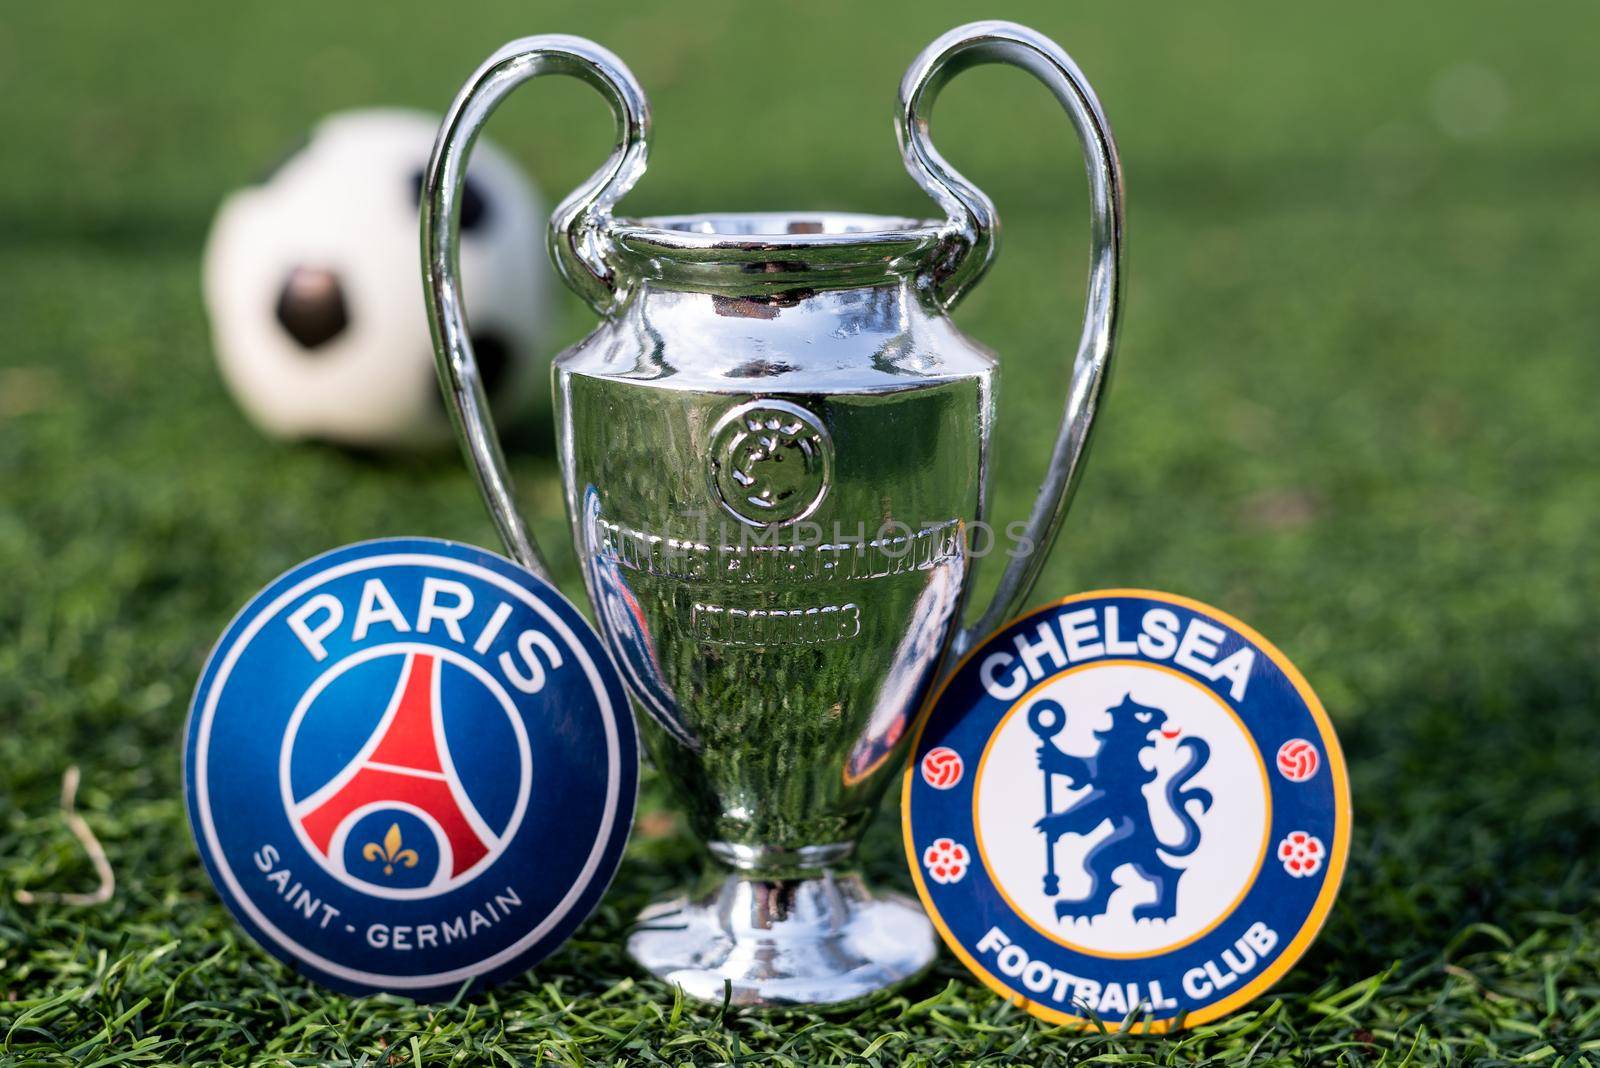 April 16, 2021 Moscow, Russia. The UEFA Champions League Cup and the emblems of the football clubs Paris Saint-Germain F. C. and Chelsea F. C. London on the green grass of the lawn.